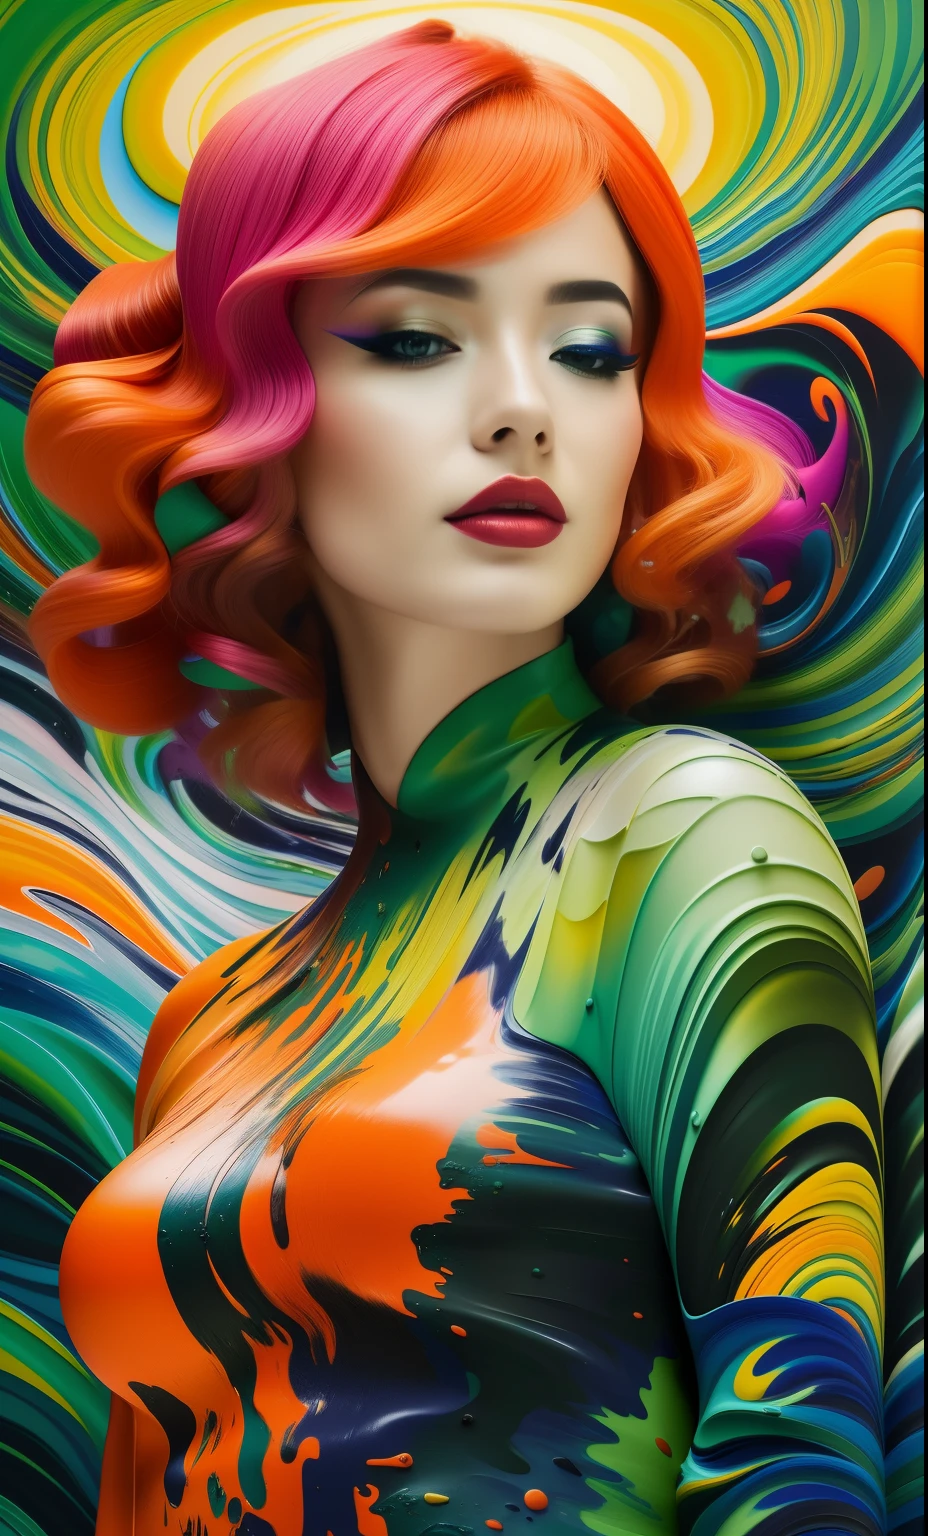 by Luis Duarte, closeup, beautiful sensual scandinavian woman in [fractal clouds jungle swamp] body suit, [Kuvshinov | van Gogh | Georges Barbier | Klimt | Geremy Mann | Giovanni Boldini | Afremov] heavy brushstrokes stained impasto oil, orange, cream, blue, fuchsia, bright green, vivid gradient colors 2d 3d relief tesselation mixed media vector fluid textured, Dark Influence, NijiExpress 3D v2, Oil painting, Ink v3, Splash style, Abstract Art,3D, High definition, Photo realistic, specified, Epic style, Illustrated v3, Deco Influence, Air Brush style, drawing, Niji Art